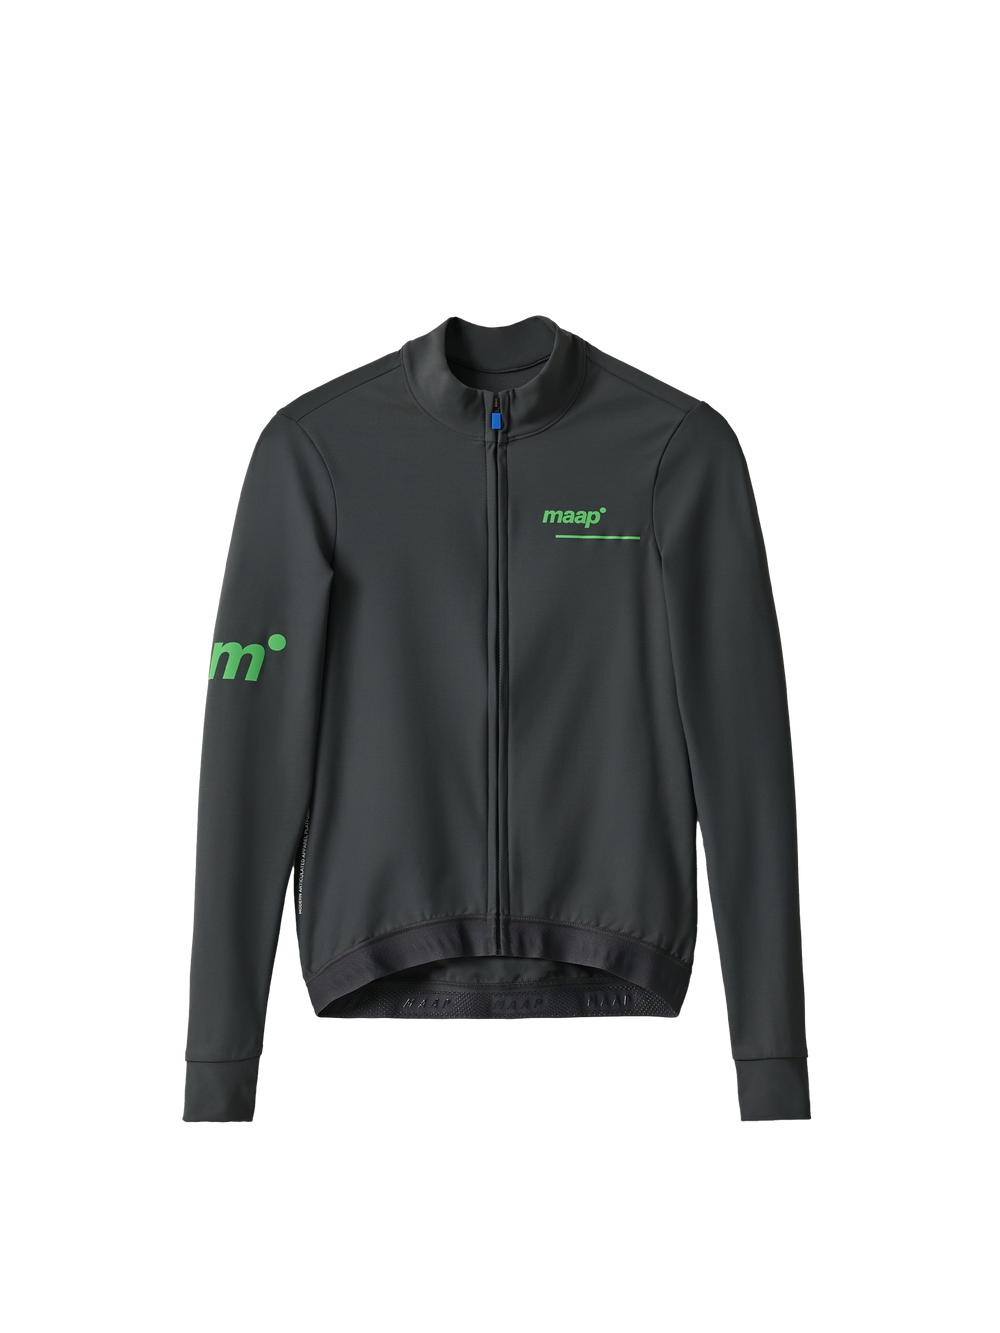 Product Image for Women's Training Thermal LS Jersey